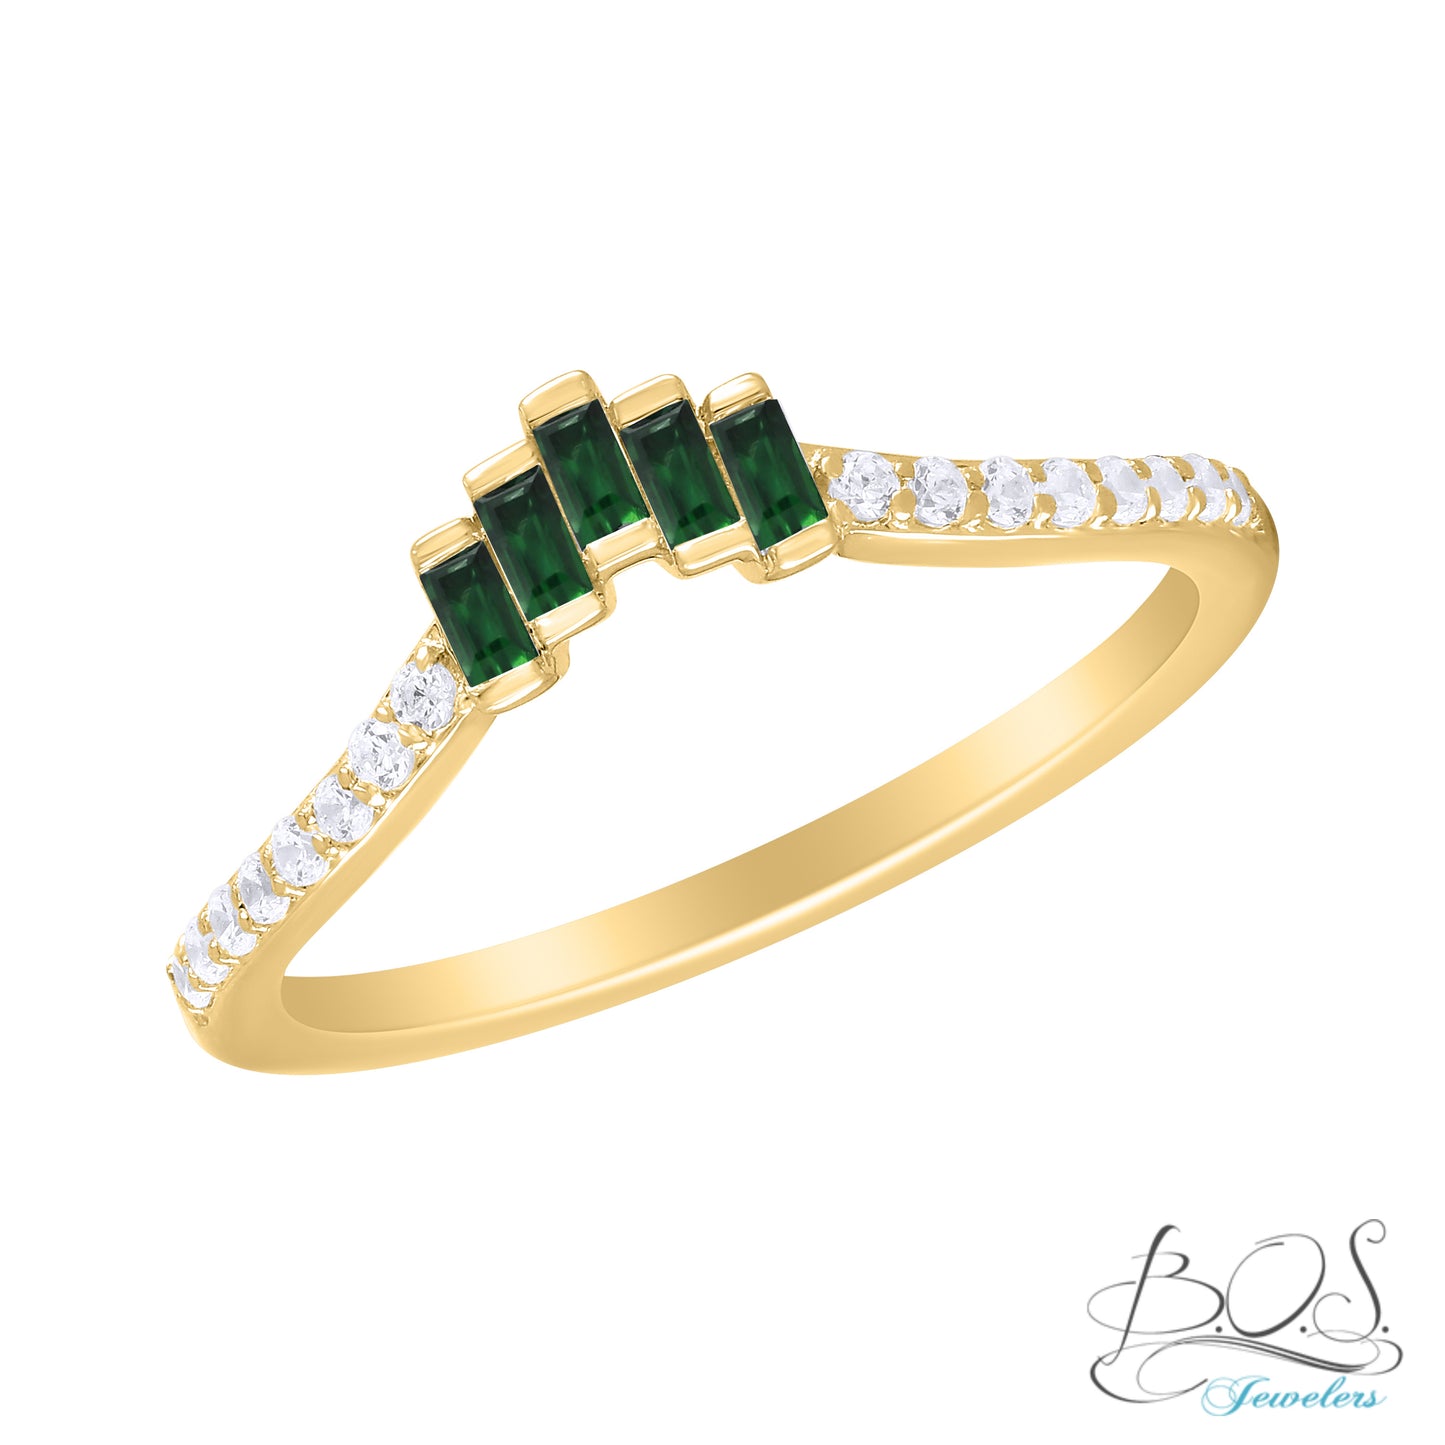 14K Gold Color Stone Baguette Ring with Diamonds